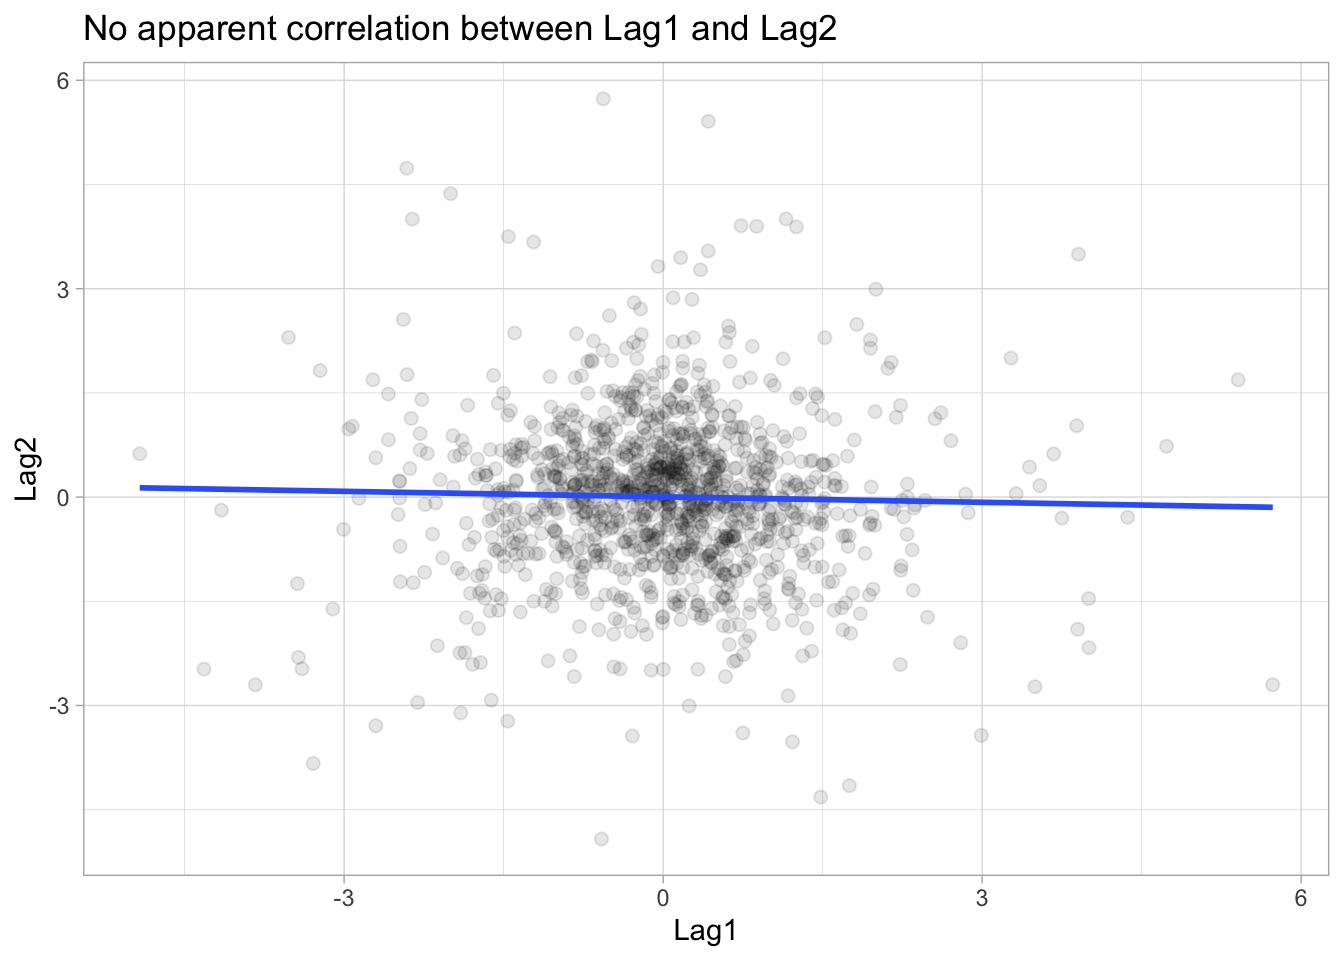 Scatter chart. Lag1 along the x-axis and Lag2 along the y-axis. No apparent correlation between Lag1 and Lag2.